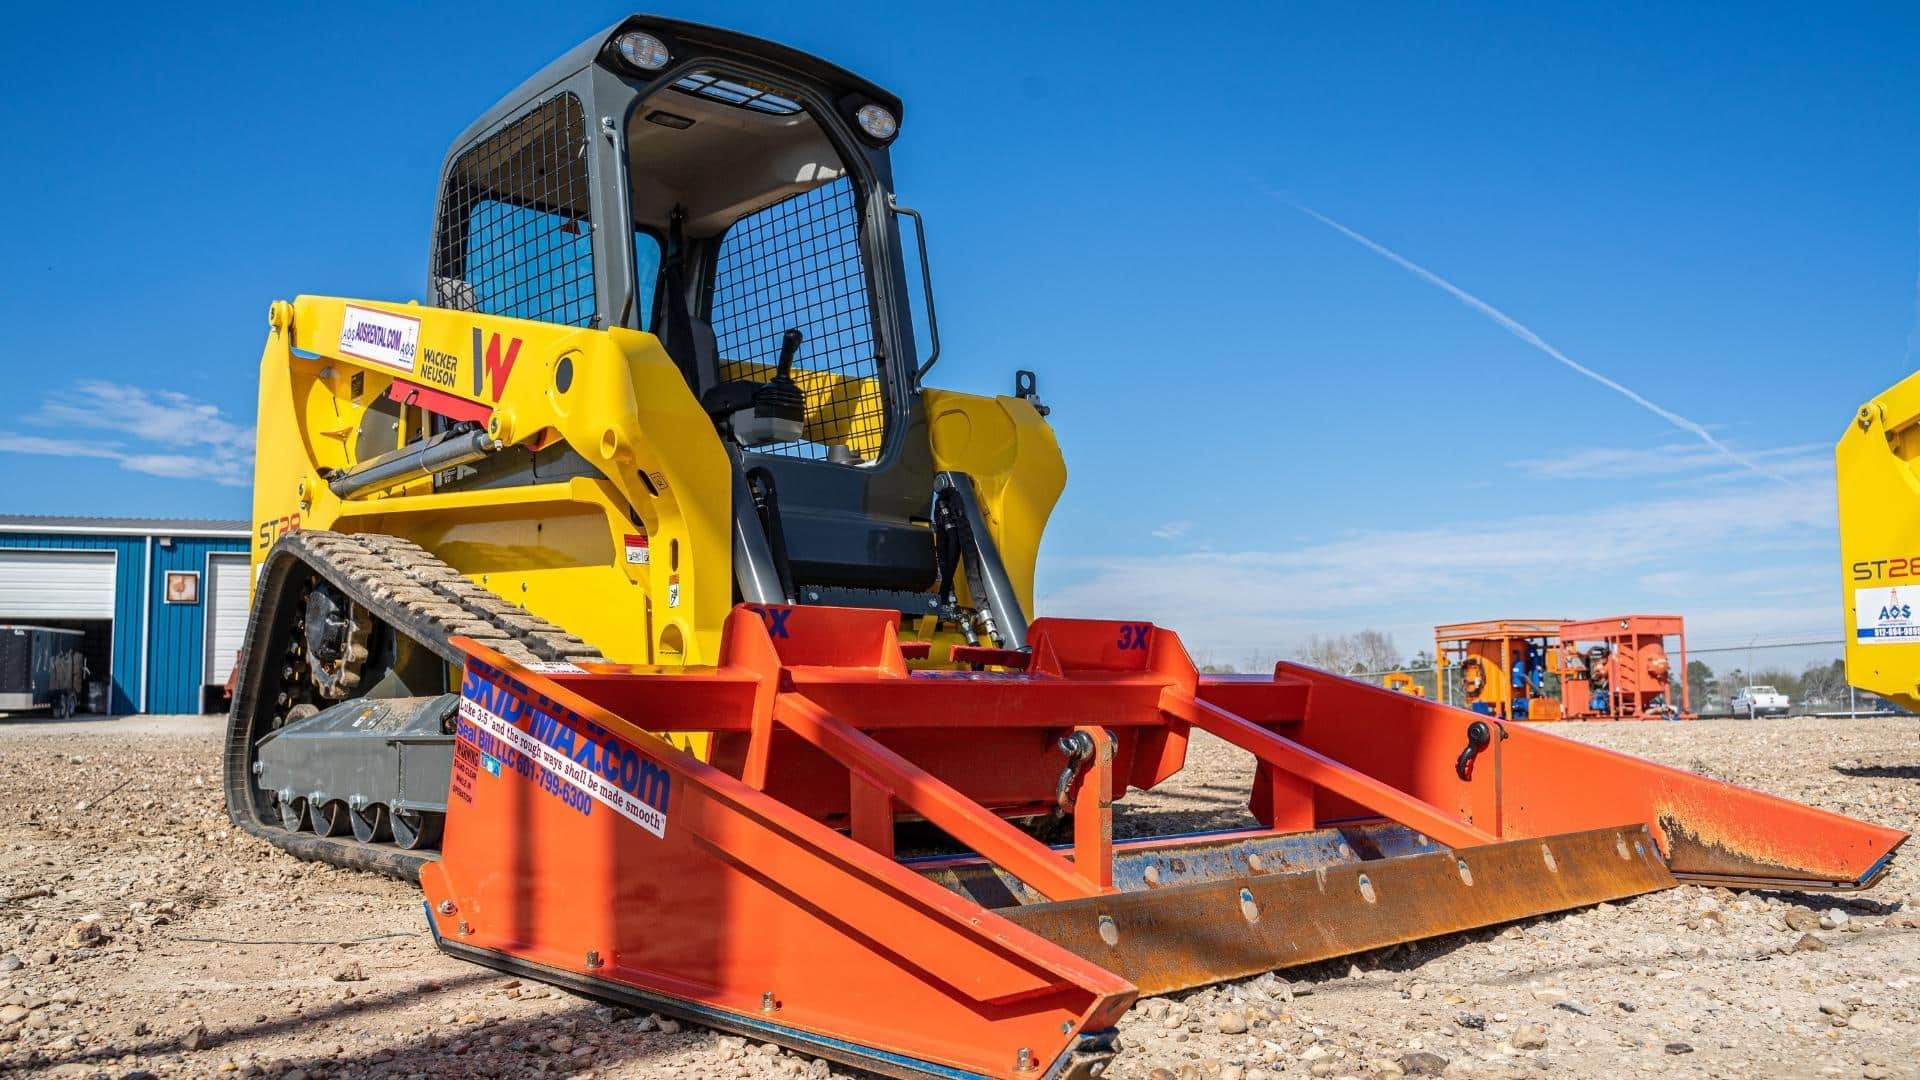 Compact track loader with a grader on the front